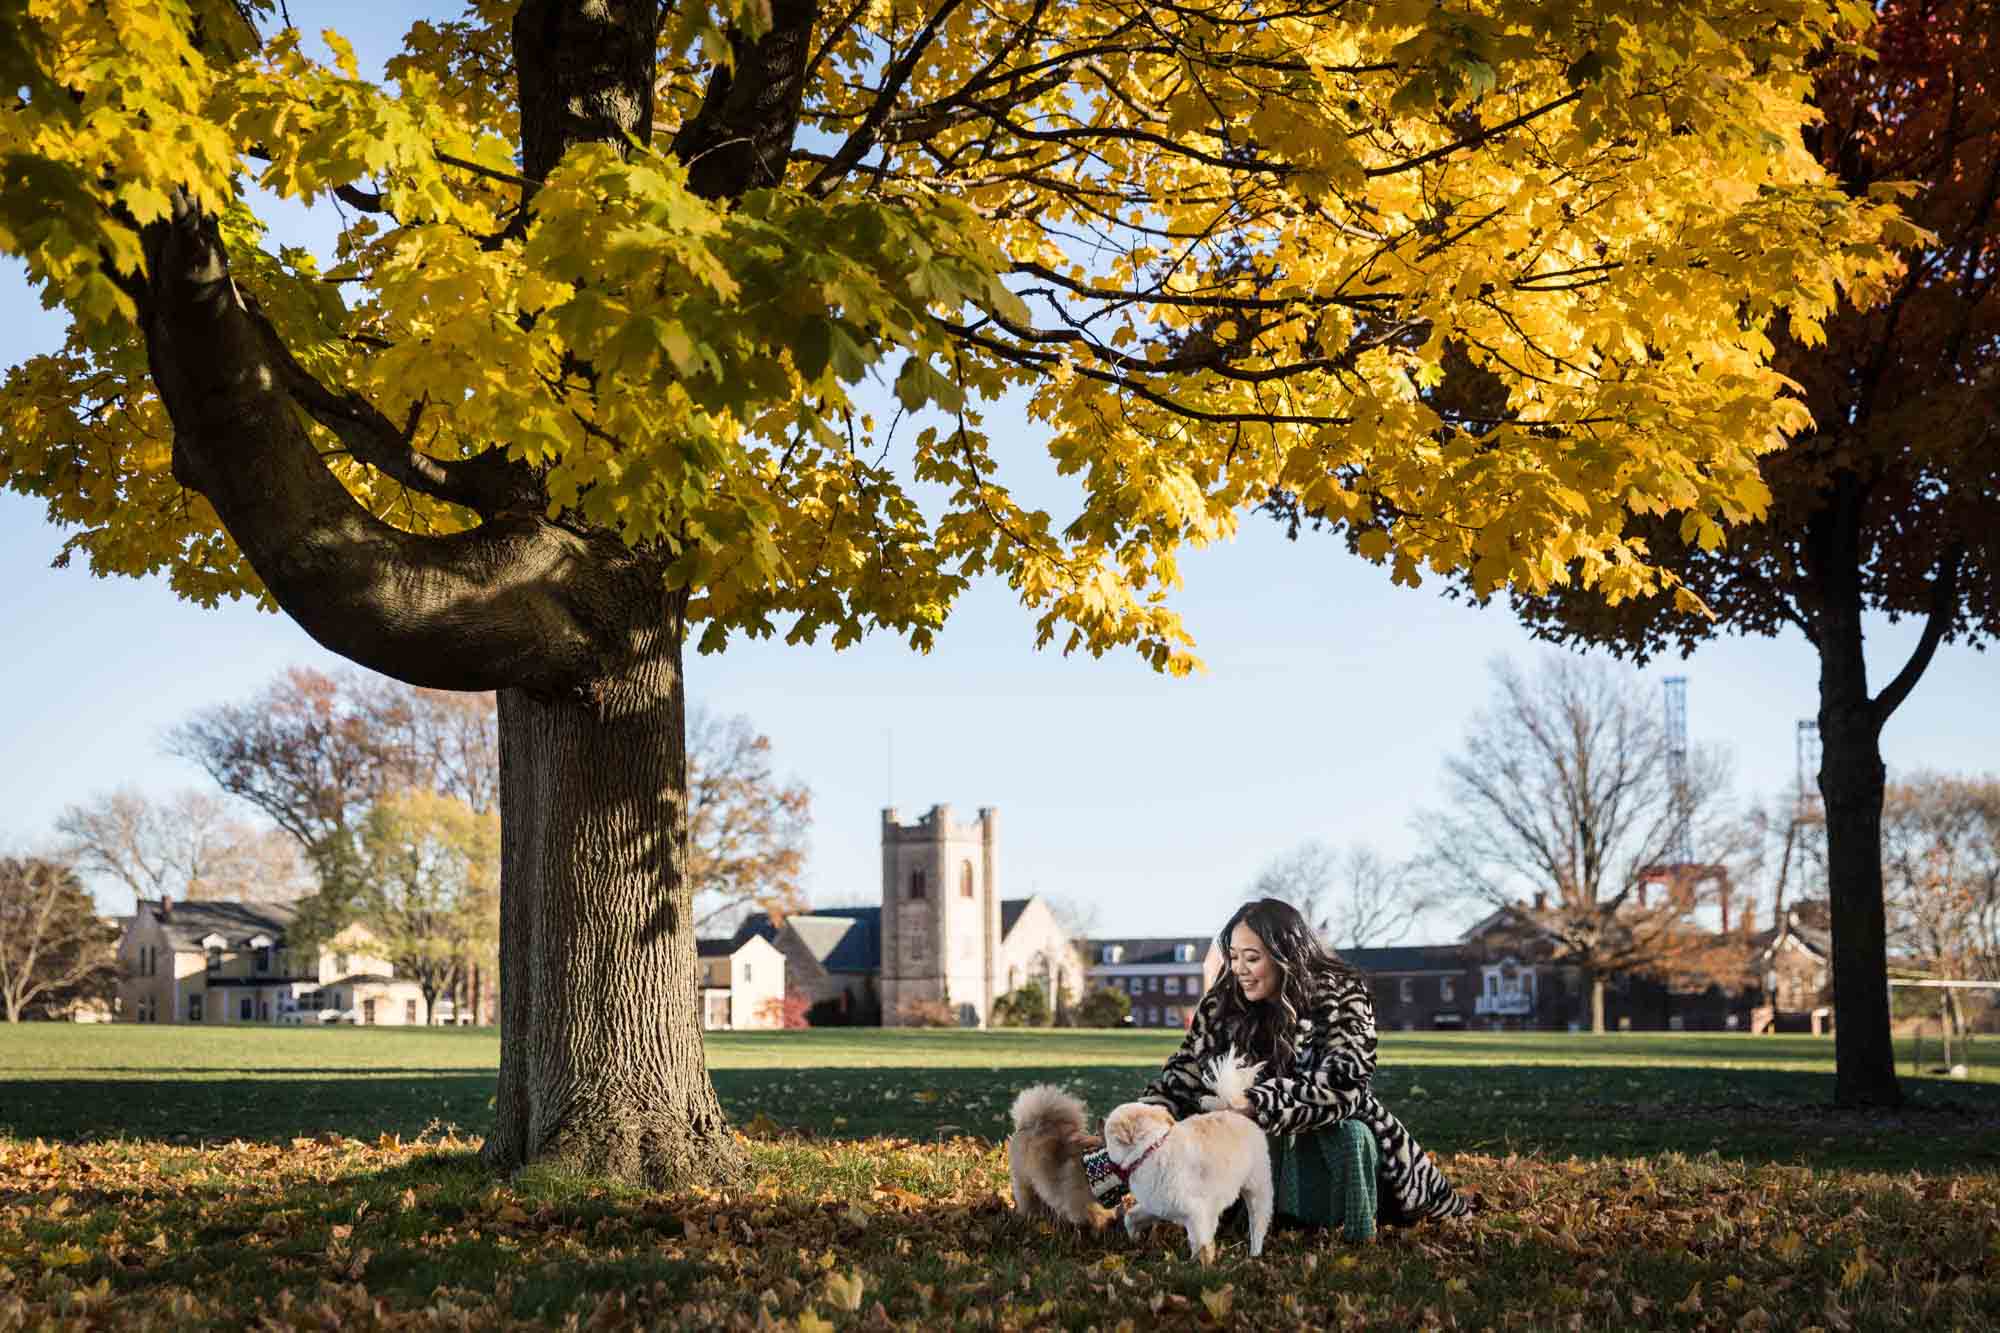 Pet portraits on Governors Island of woman playing with two Pomeranian dogs under tree with yellow leaves